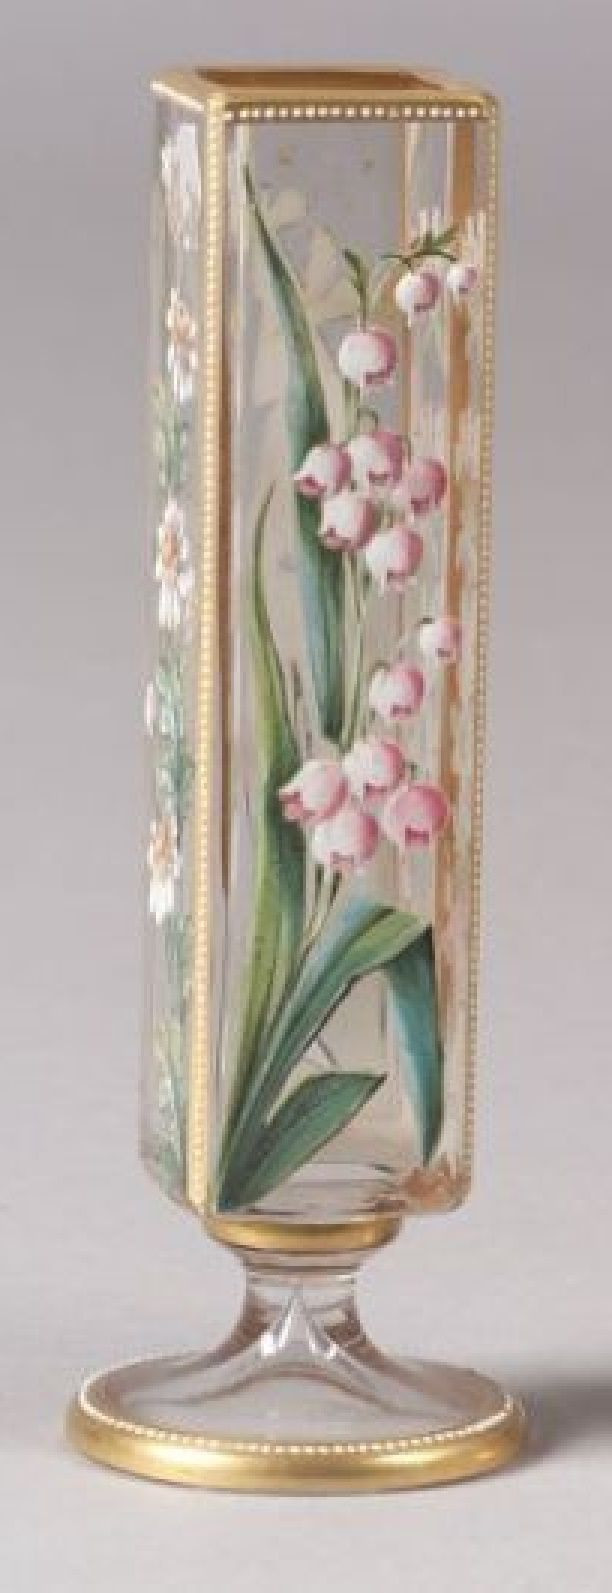 van briggle bud vase of 1482 best glass its beauty its art its amazing images on throughout enameled glass vases possibly lobmeyer austria late century